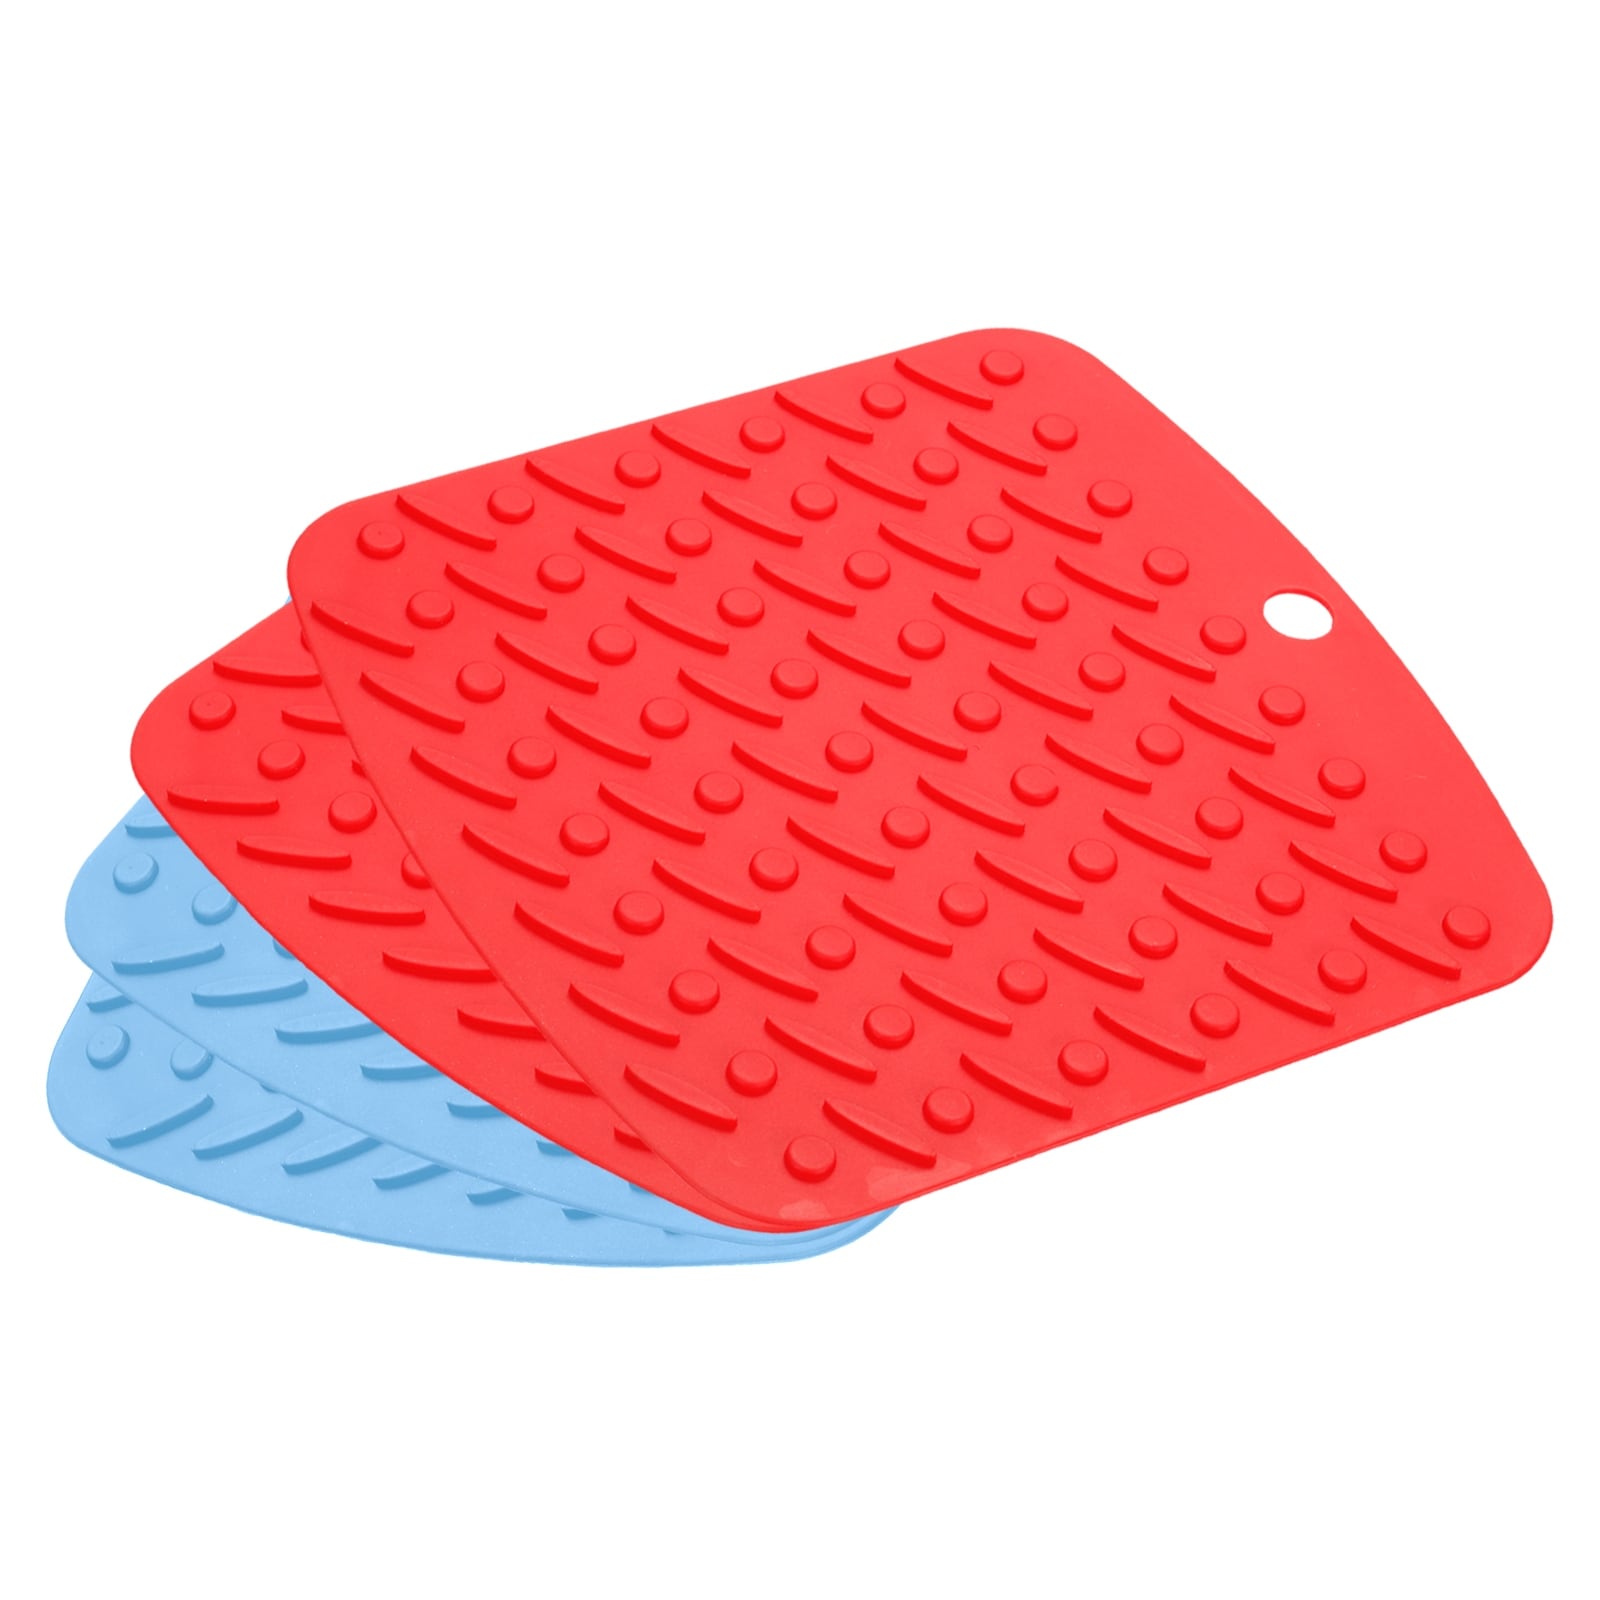 https://ak1.ostkcdn.com/images/products/is/images/direct/9e126c01793b439204f3eff29316c218f3cc5dd0/4pcs-Silicone-Trivet-Mat-Kitchen-Hot-Pads-for-Pots-Dish-Sky-Blue-Red.jpg